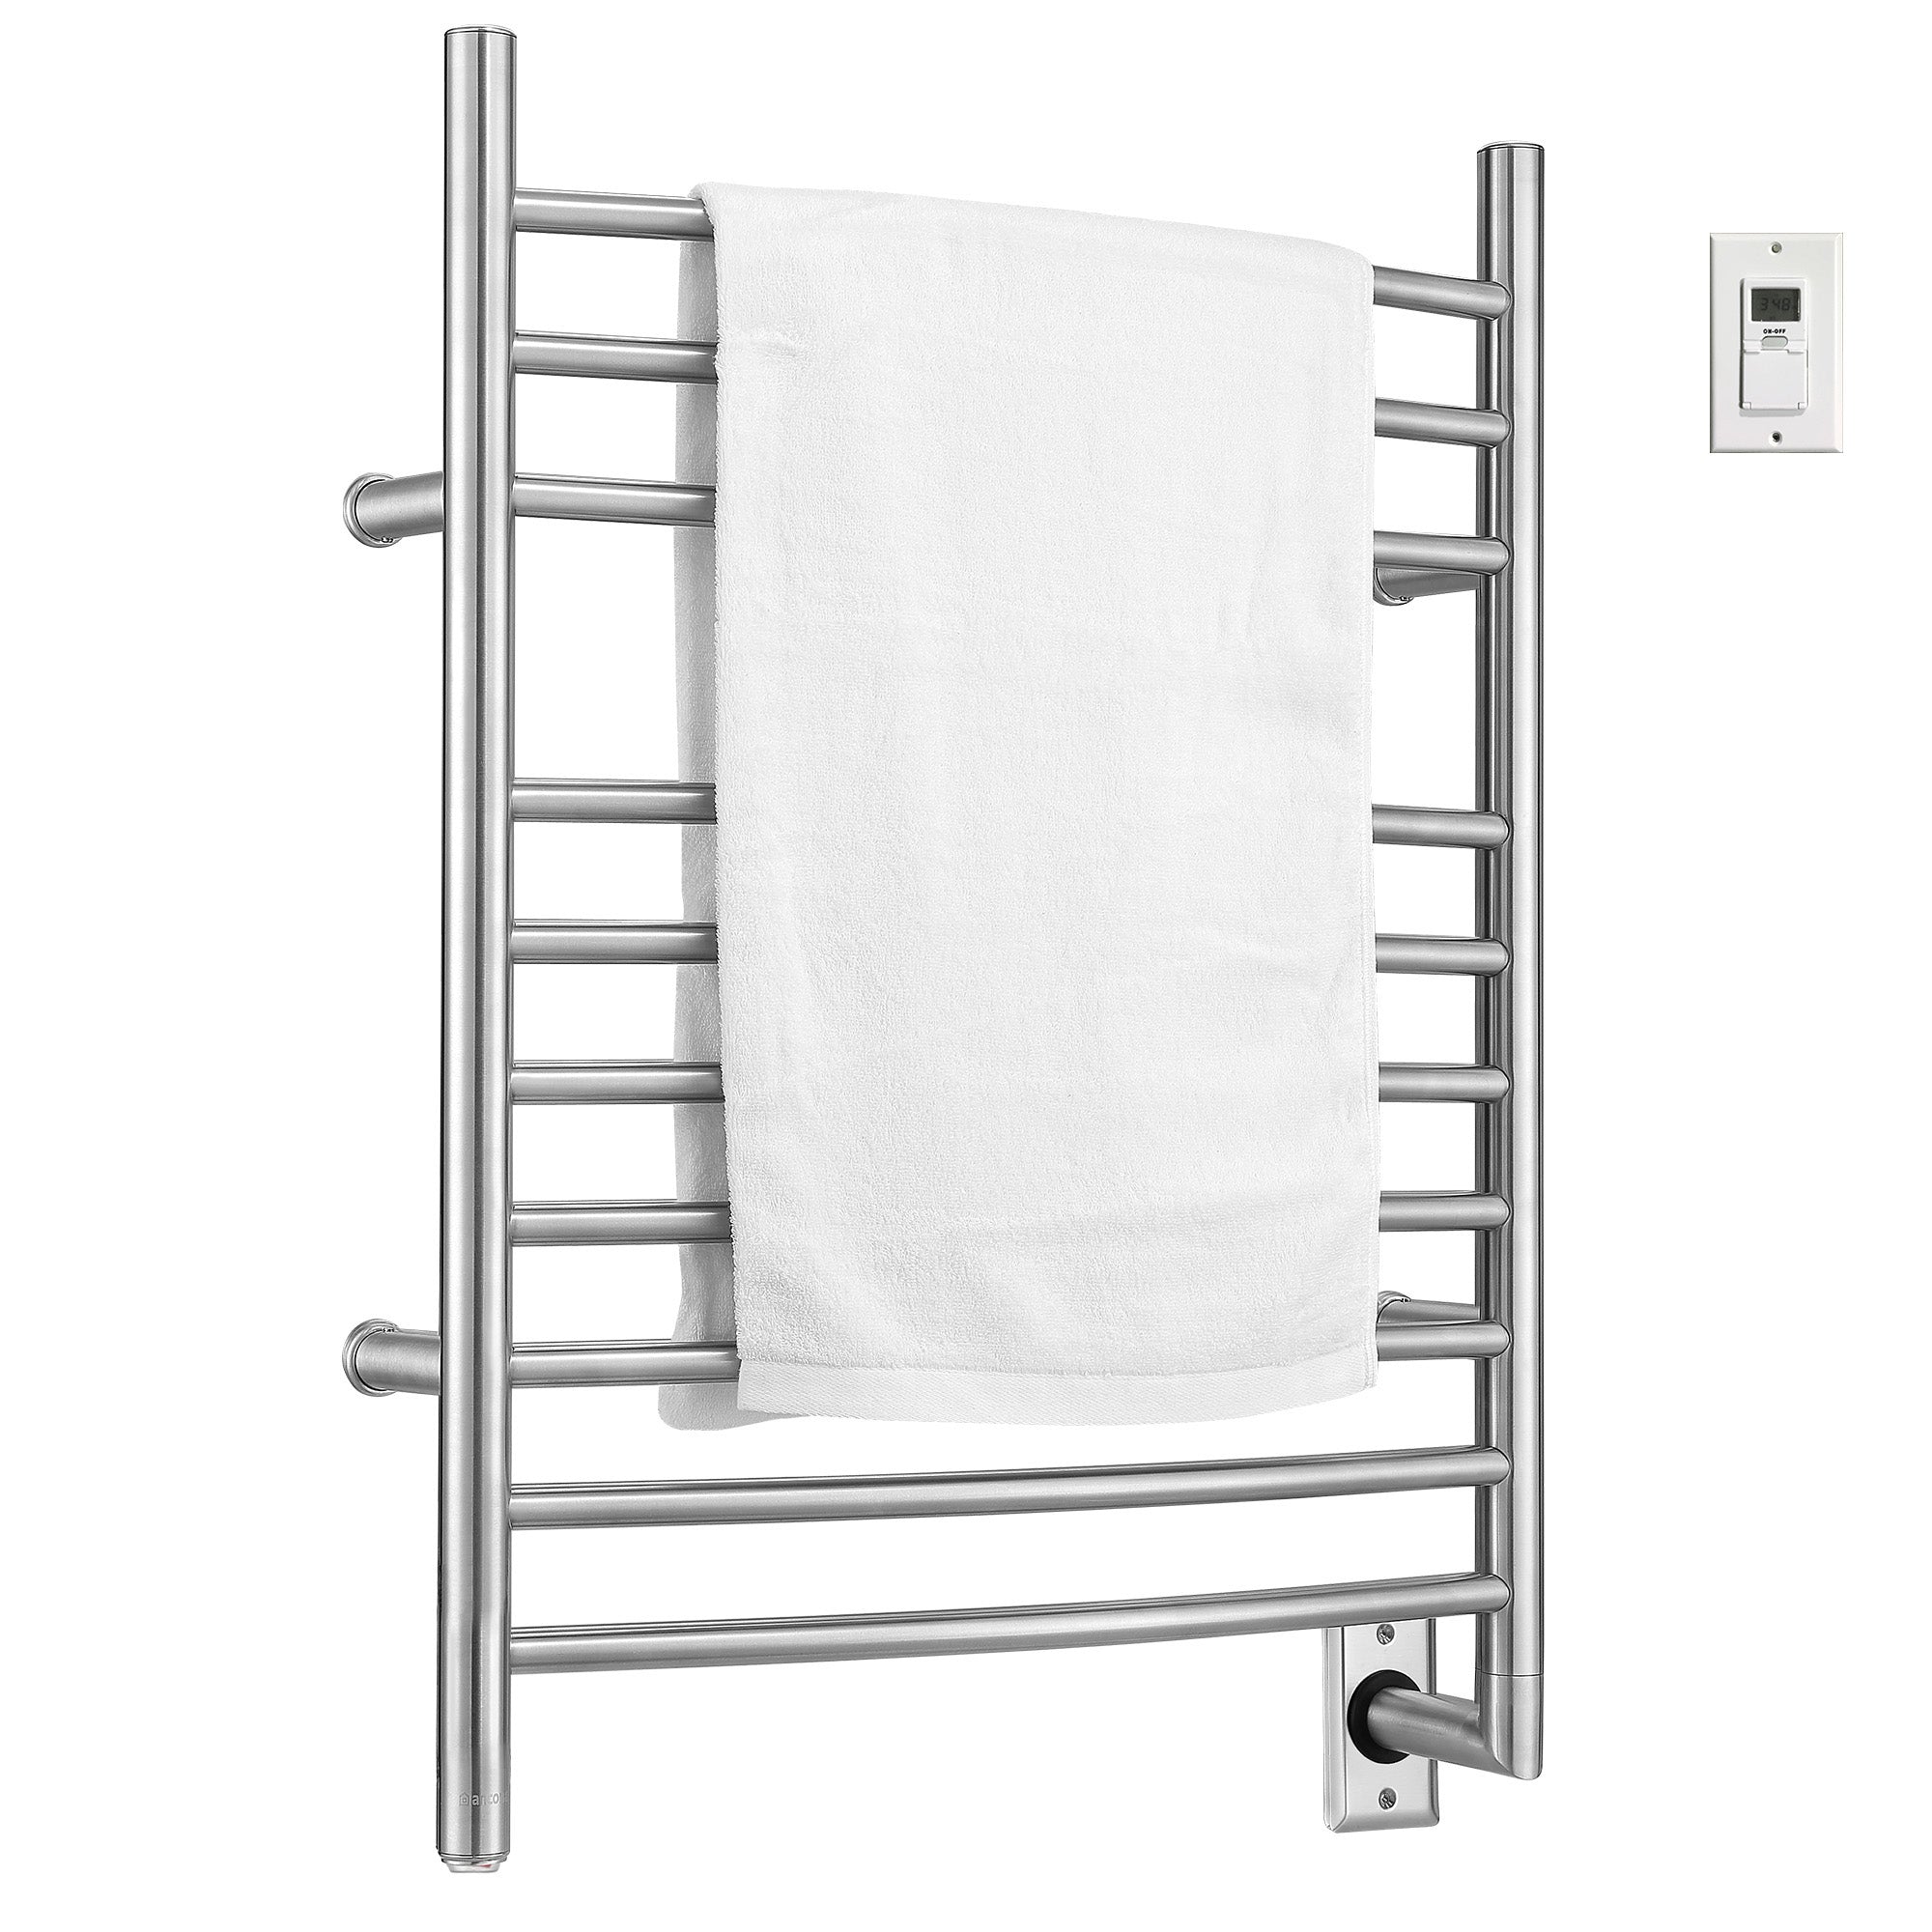 Ancona Comfort 10-Bar Hardwired Wall Mount Towel Warmer with Wall Timer in Brushed Stainless Steel